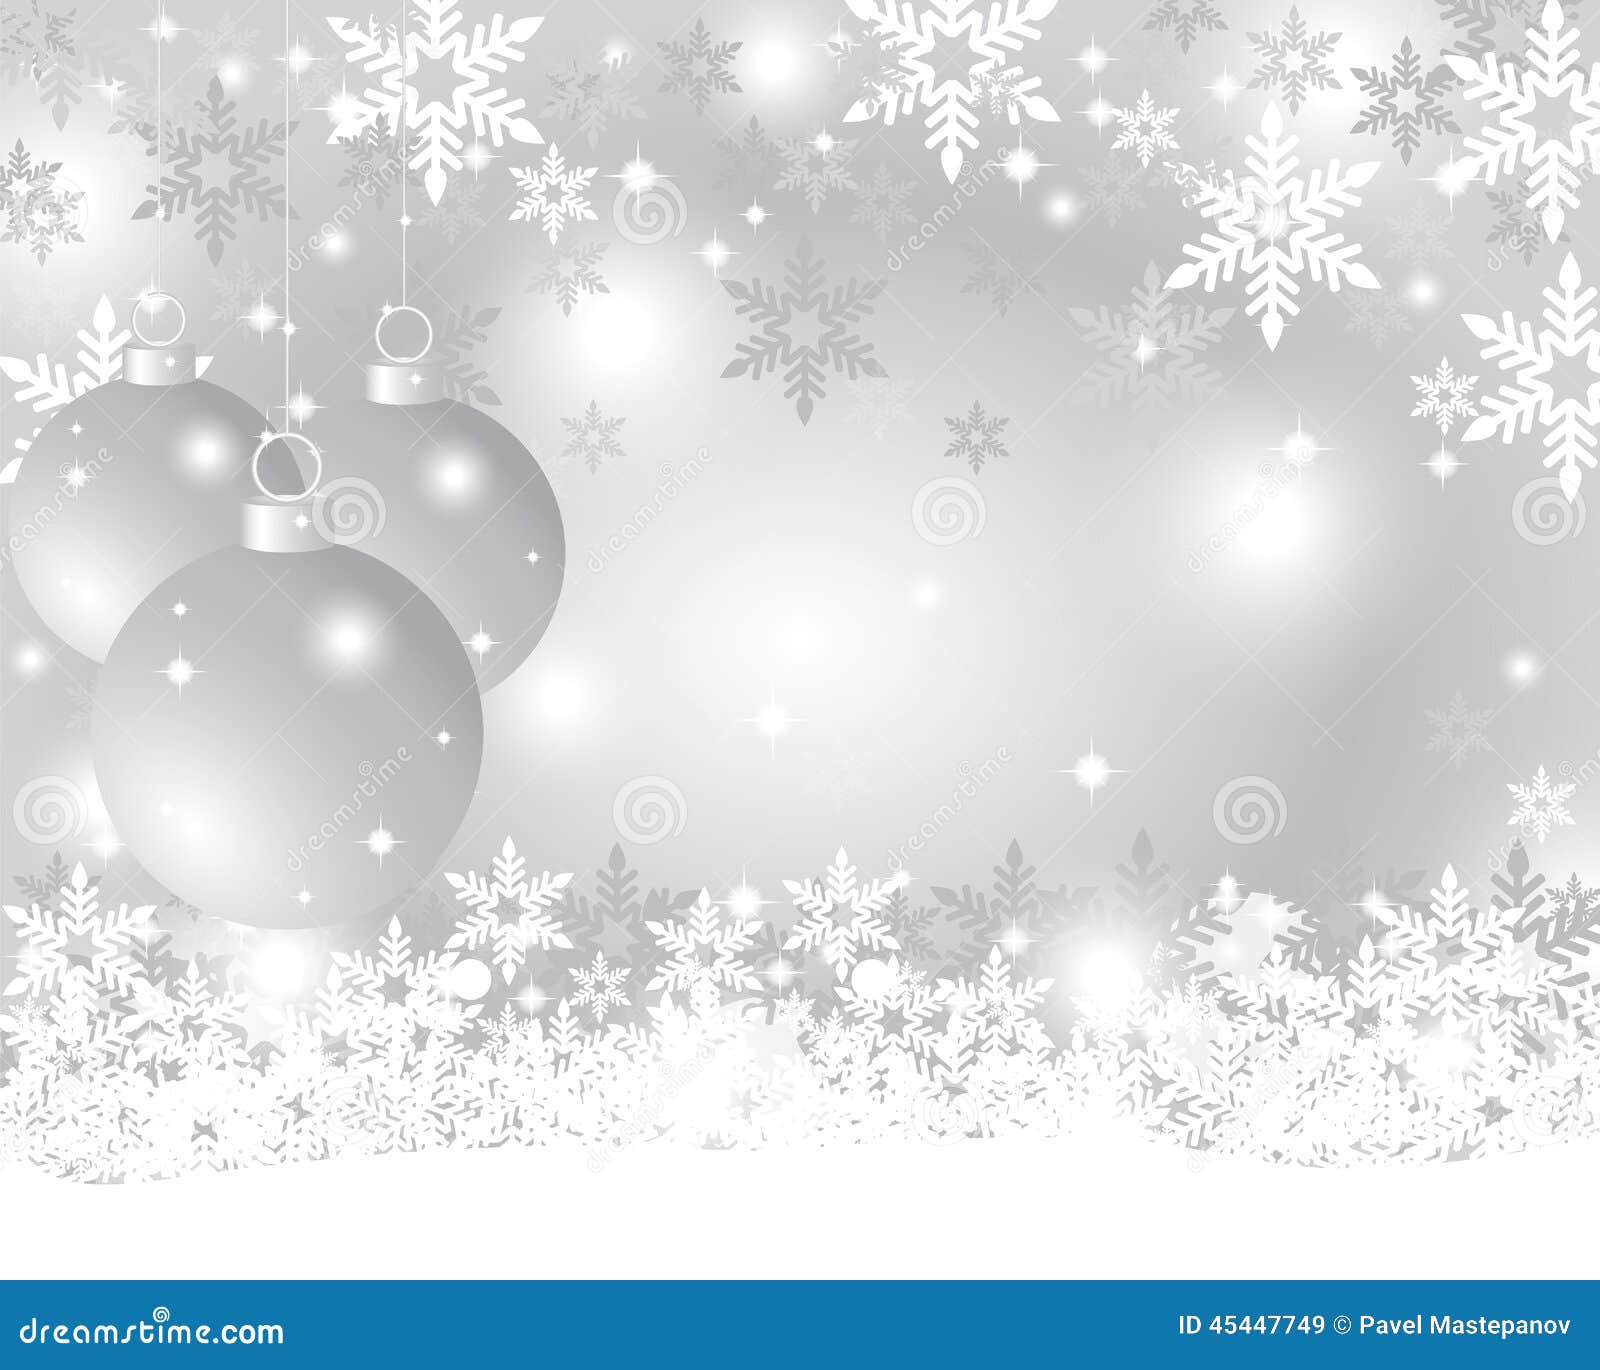 Download Silver Christmas Background With Christmas Balls Stock Illustration Illustration of congratulations background